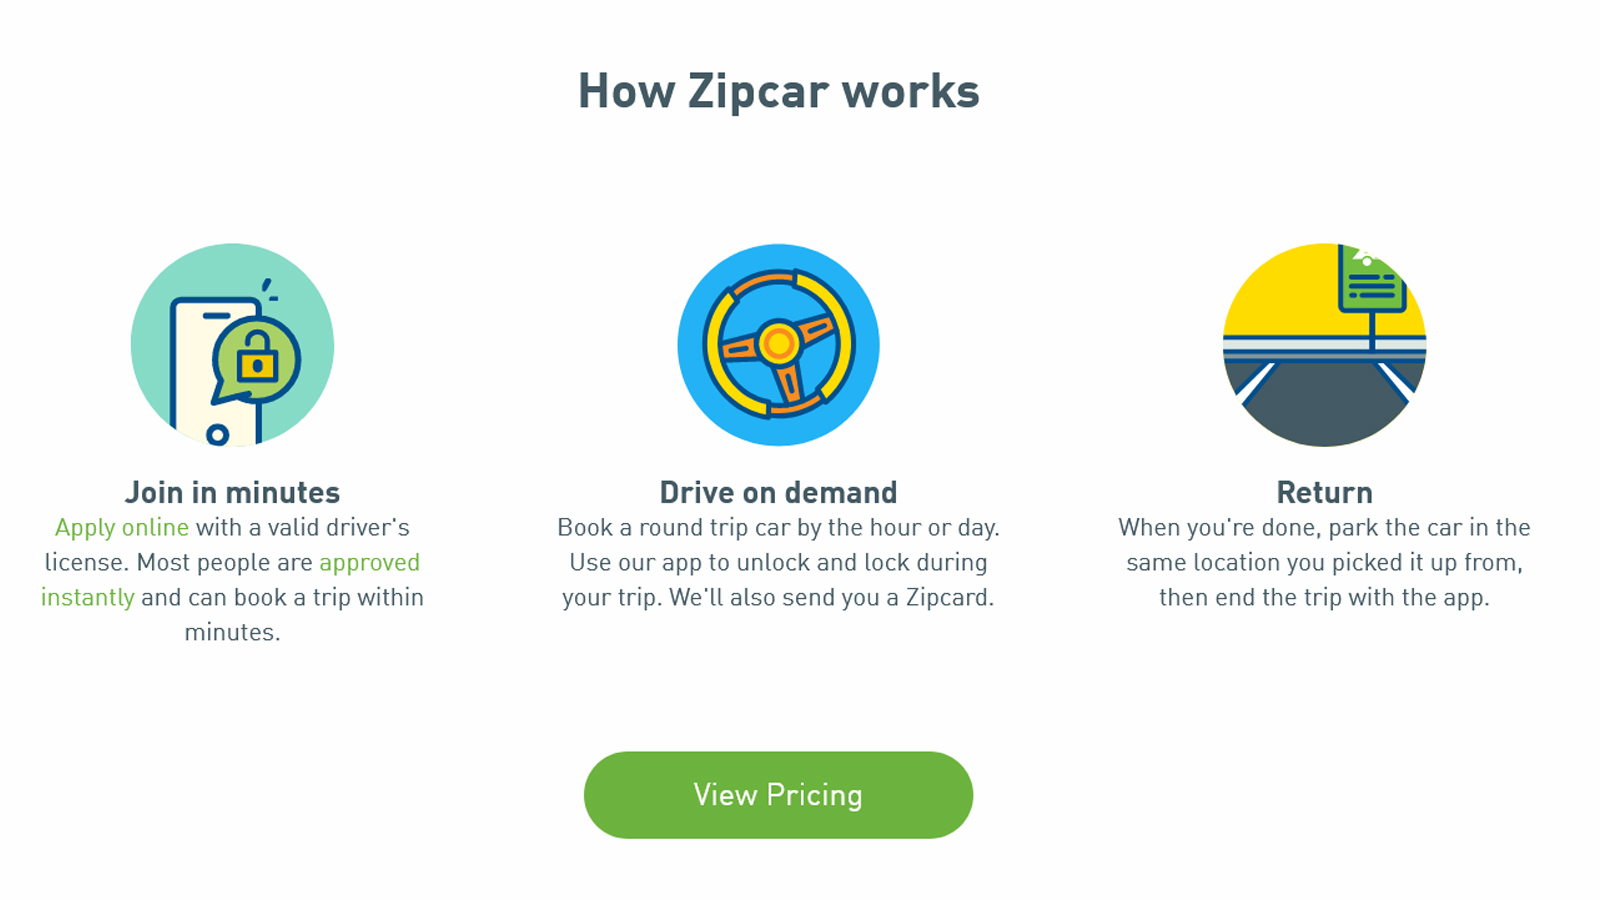 Find detailed information about Zipcar